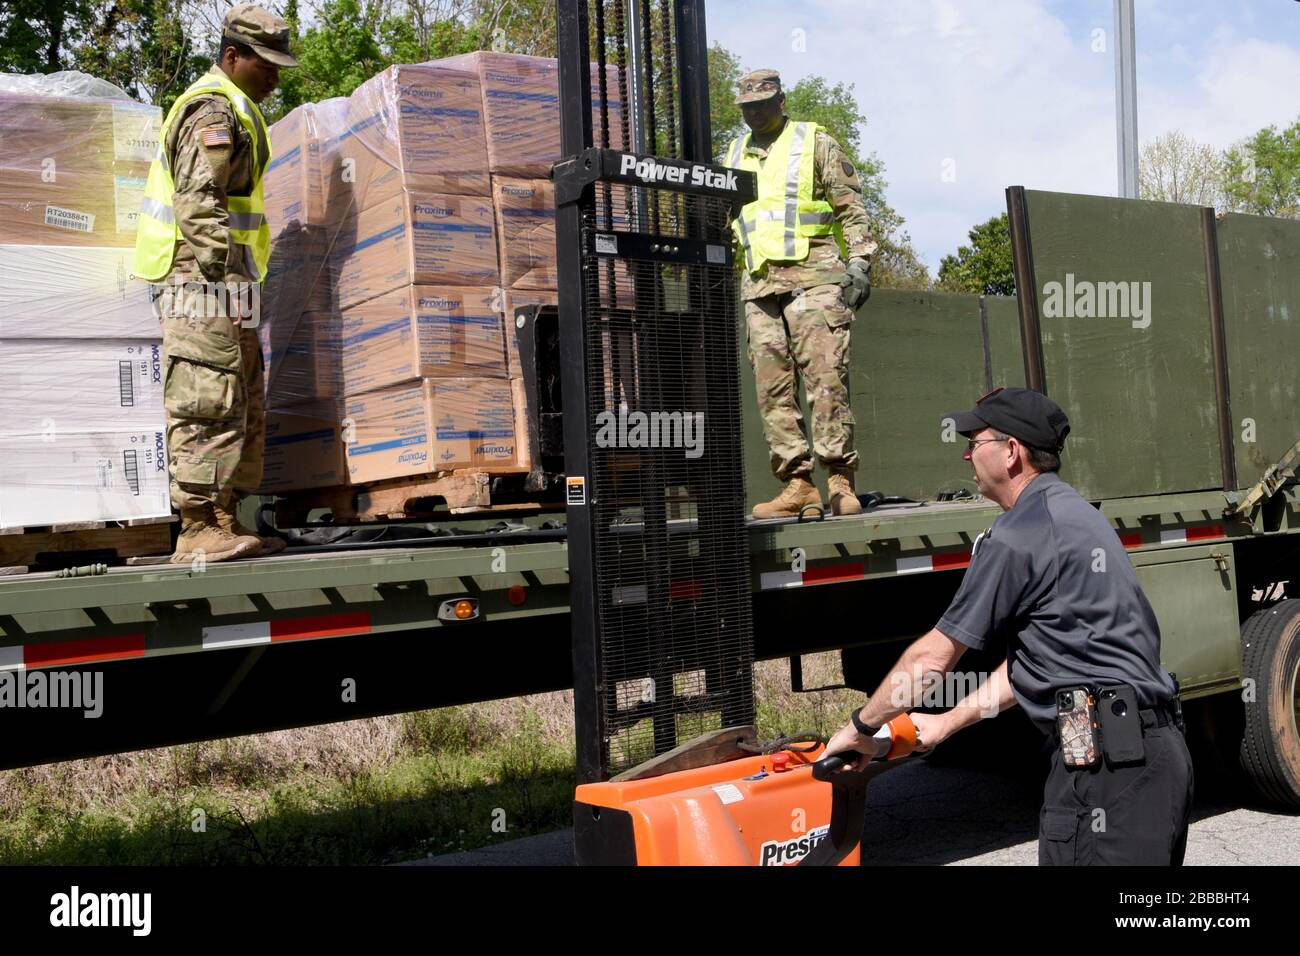 U.S. Army National Guard Soldiers with the 1053rd and 1055th Transportation companies, South Carolina National Guard, transport personal protective equipment and other supplies March 27, 2020 to the 46 counties in South Carolina in support of the South Carolina Department of Health and Environmental Control.  The South Carolina National Guard remains ready to support the counties, local and state agencies, and first responders with requested resources for as long as needed in support of COVID-19 response efforts in the state. (U.S. Army National Guard photo by Sgt. 1st Class Joe Cashion, South Stock Photo